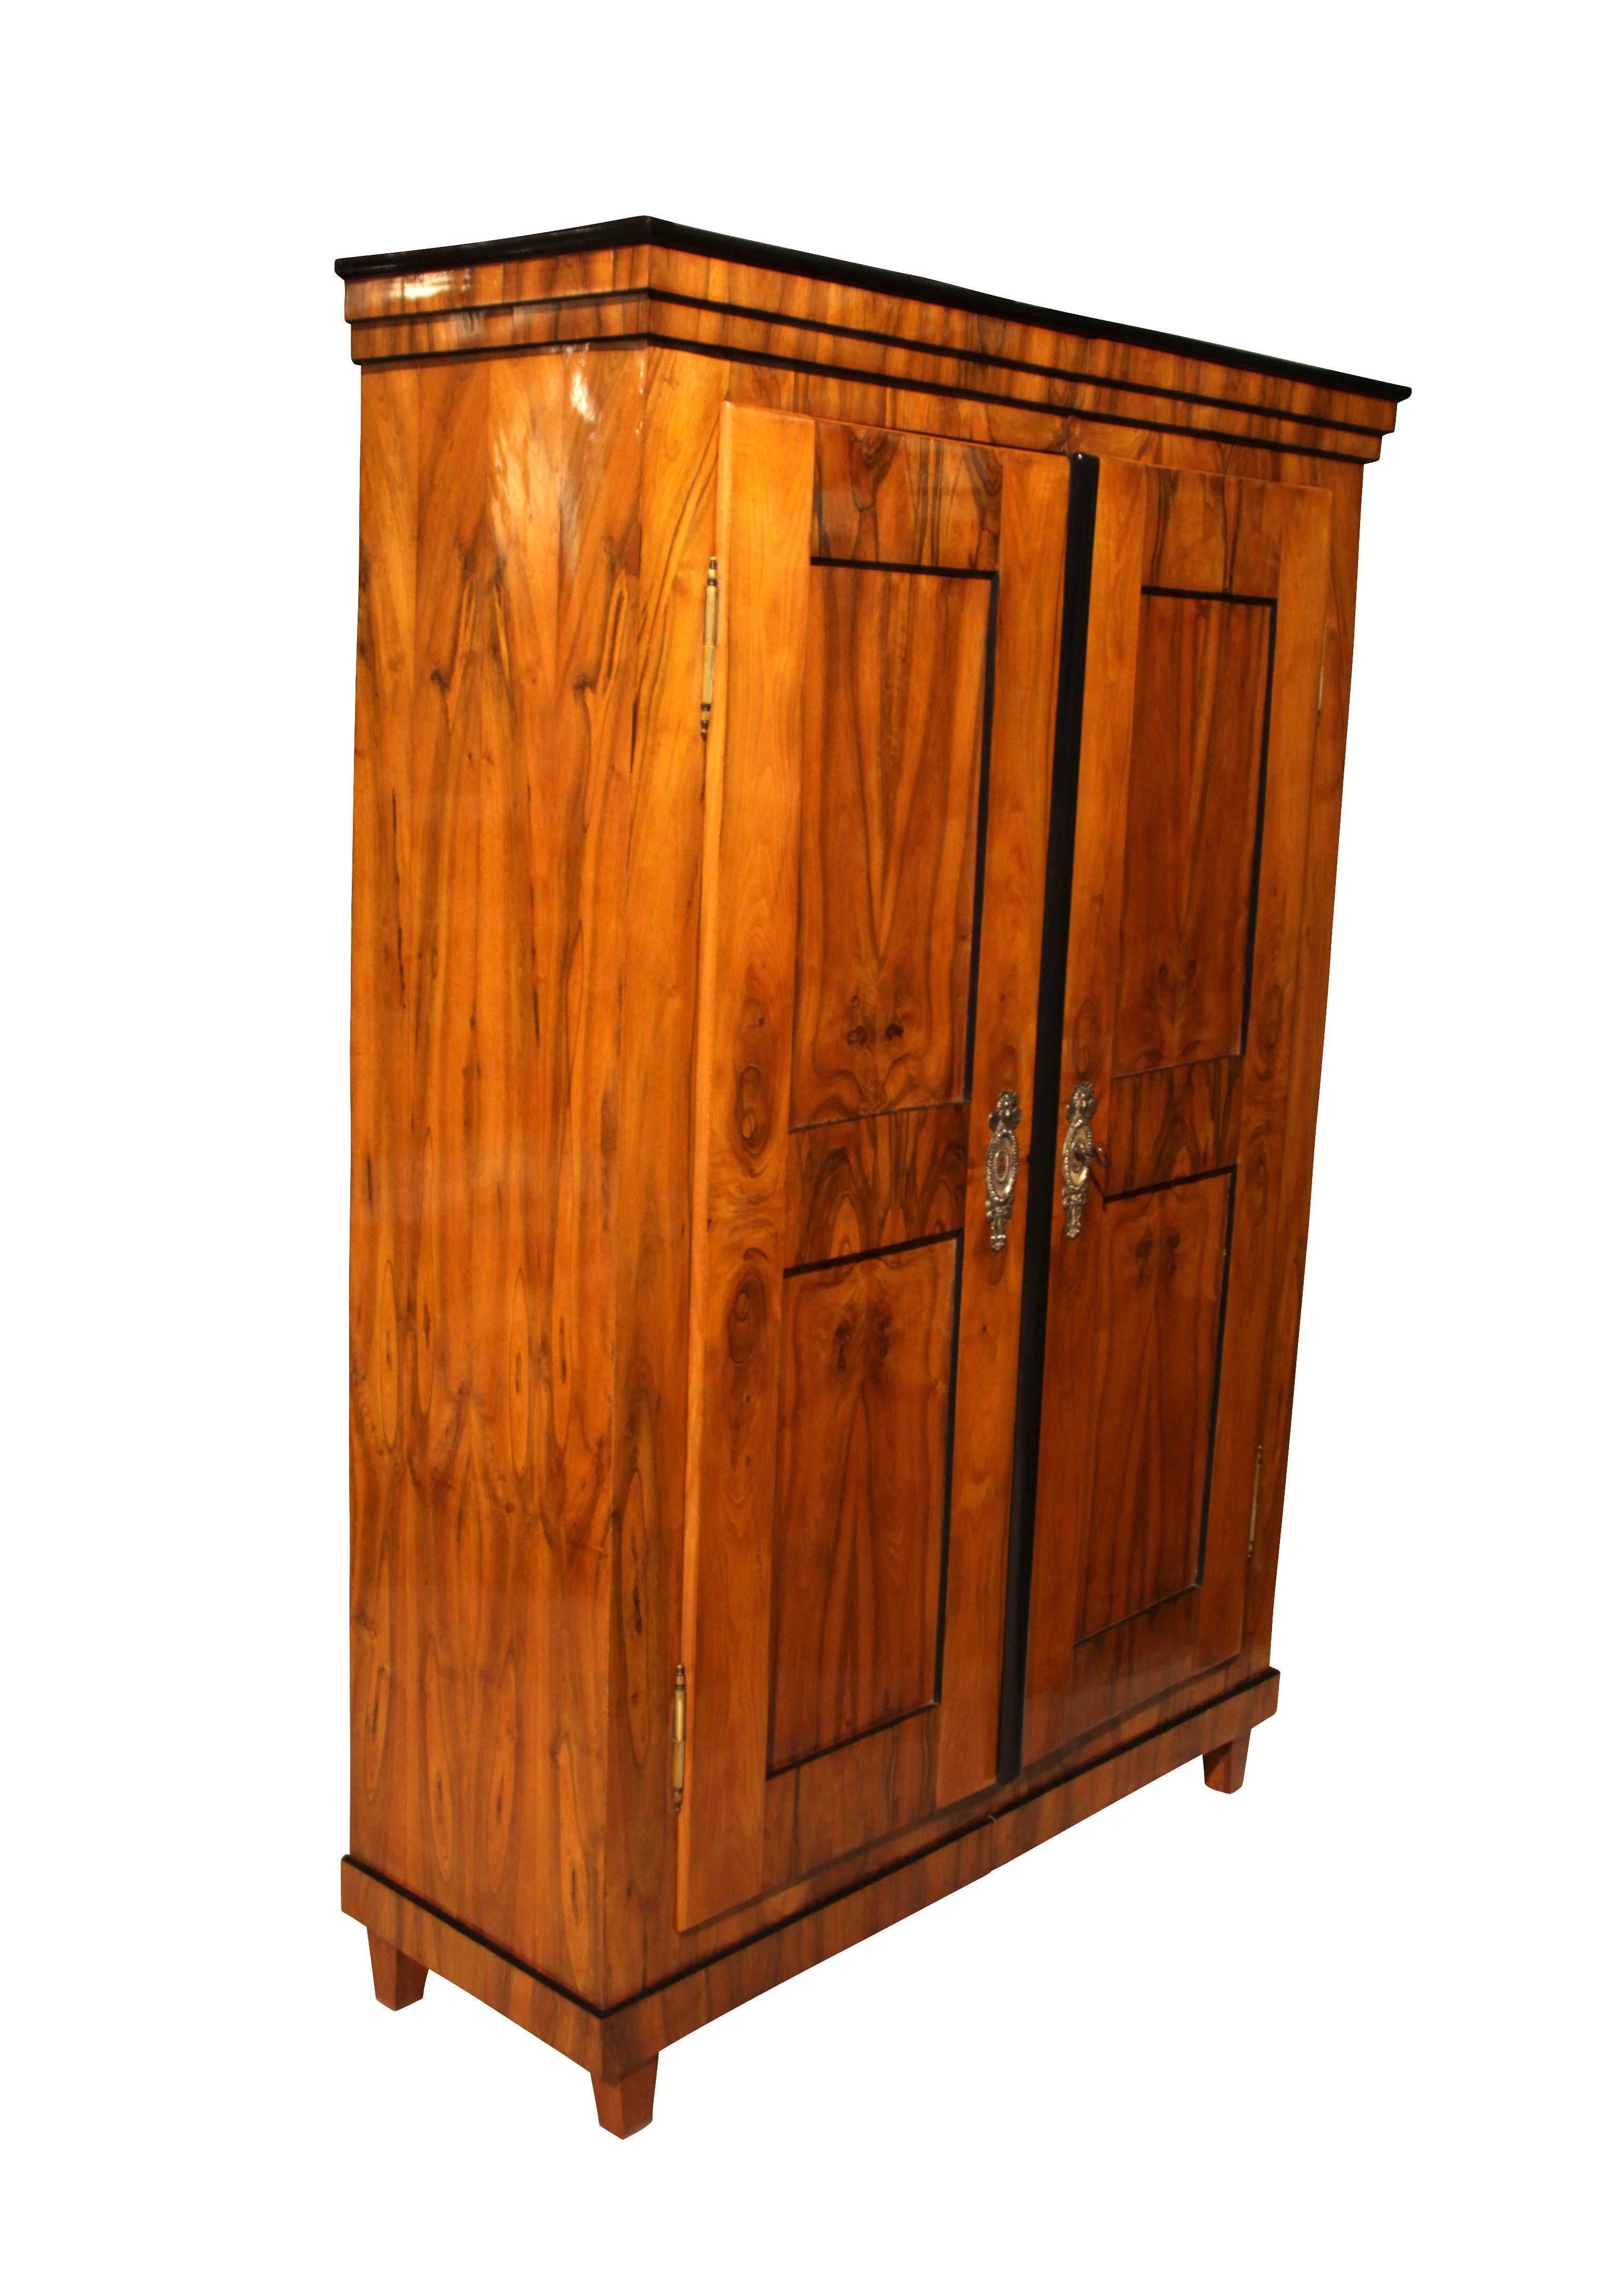 Beautiful, well-proportioned, 2-doored Biedermeier Armoire with filling panels.

Provenience: South Germany around 1820.

Wonderful walnut veneer frame and inlays. 
Original brass fittings and original, working, lock and key. 
French-polished with